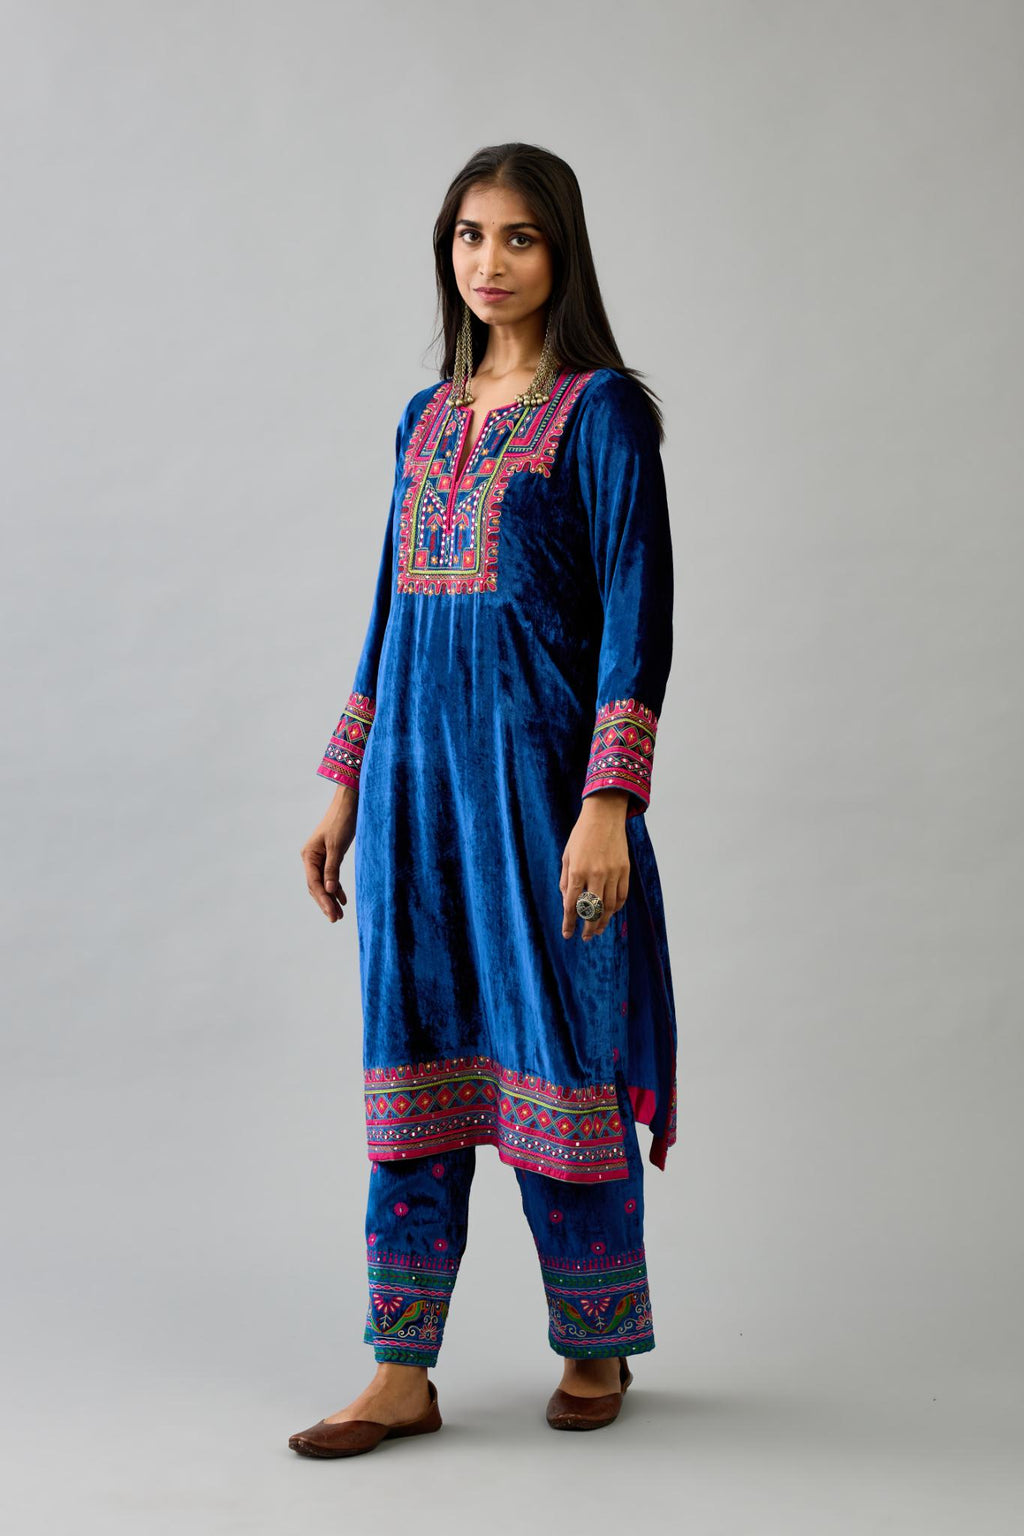 Blue silk velvet straight kurta set with yoke patchwork and silk thread embroidery highlighted with mirror, sequins, tassels and braids.